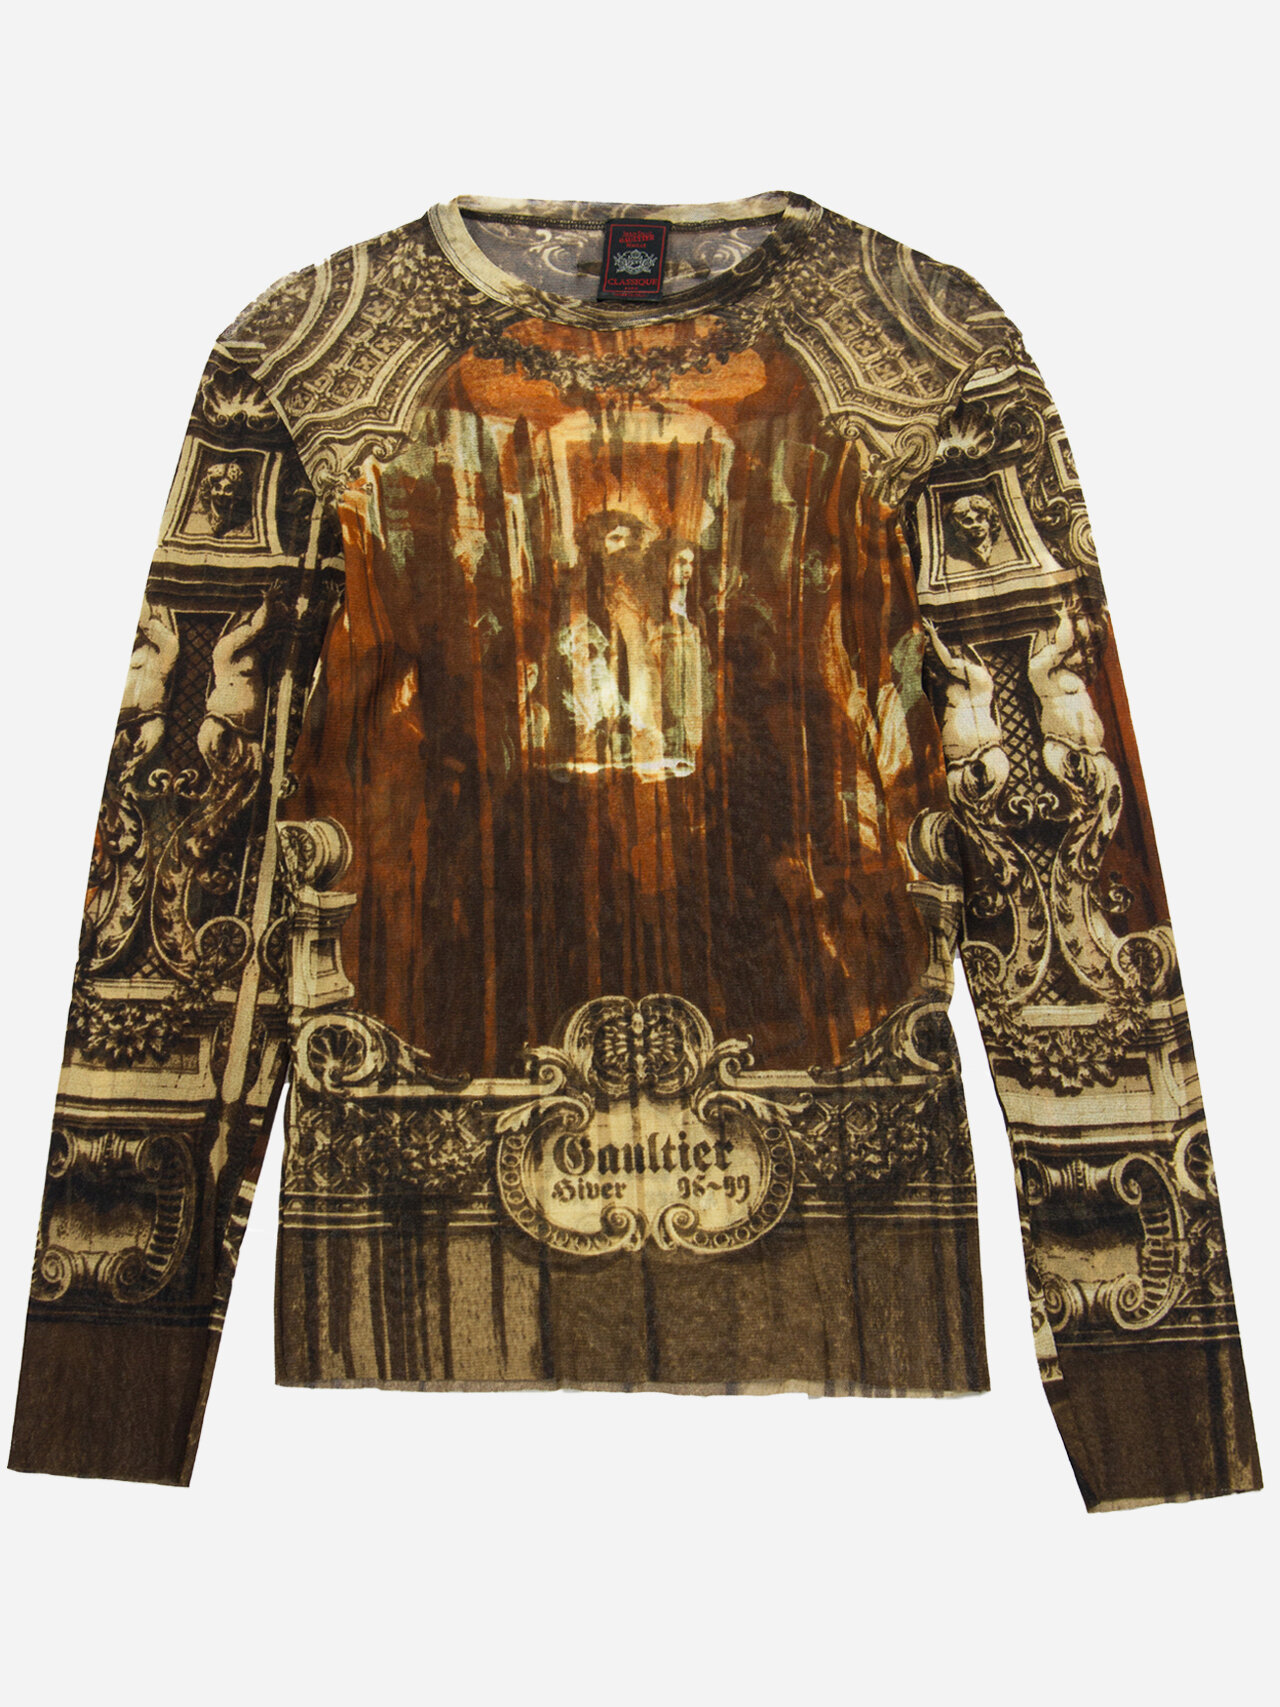 Jean Paul Gaultier AW1998 Cathedral Mesh Longsleeve